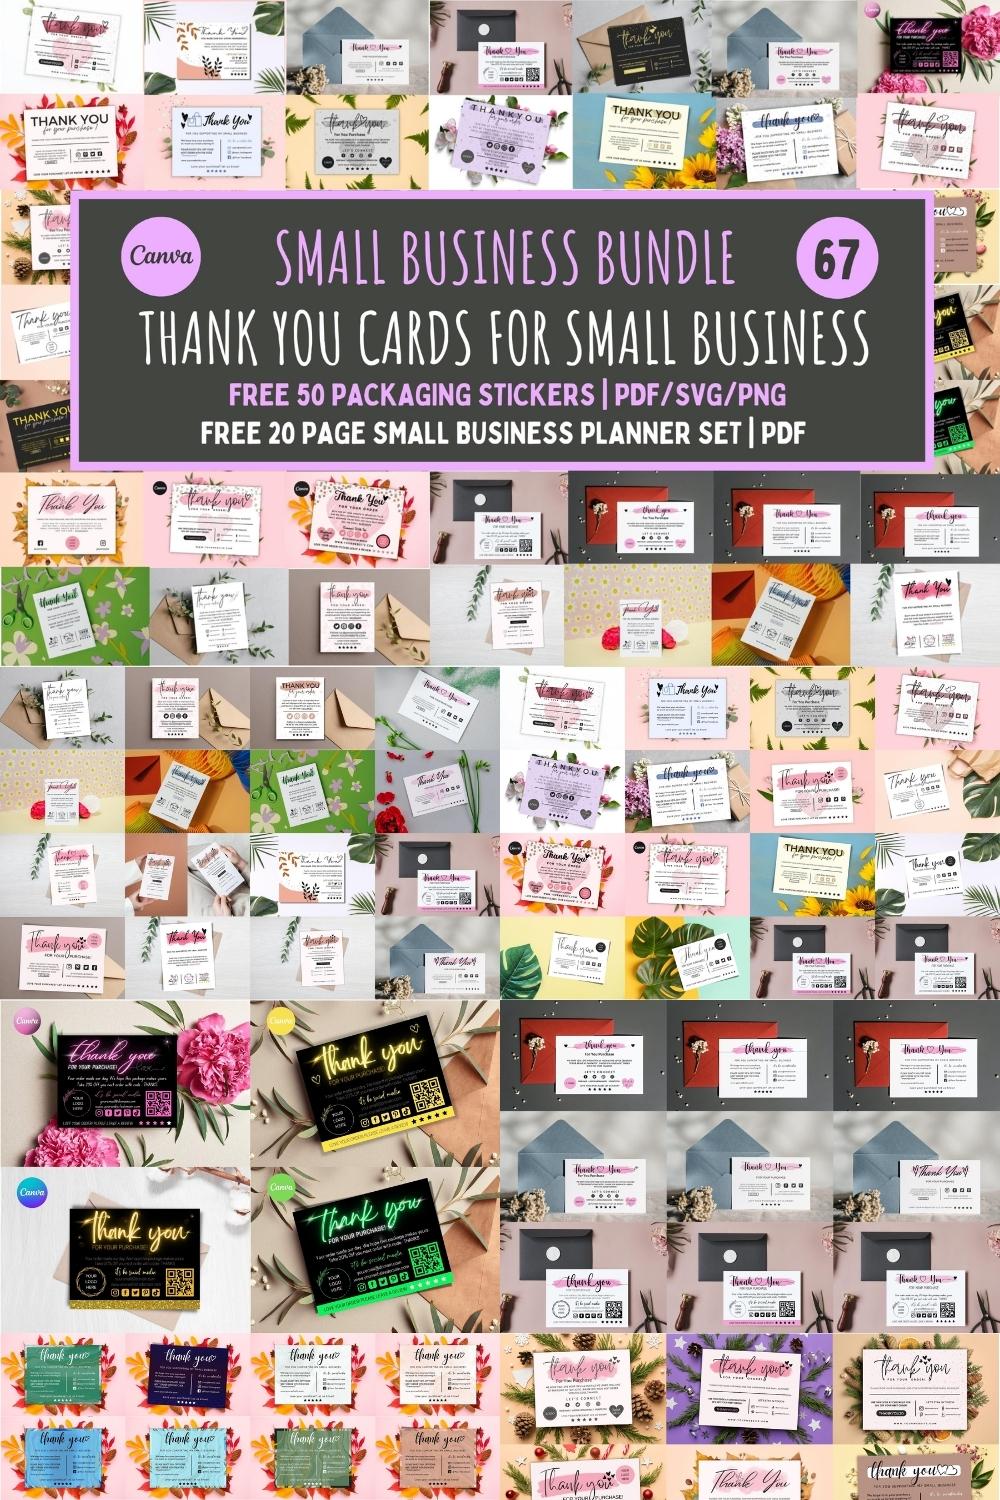 Thank You Card for Small Business Canva pinterest image.